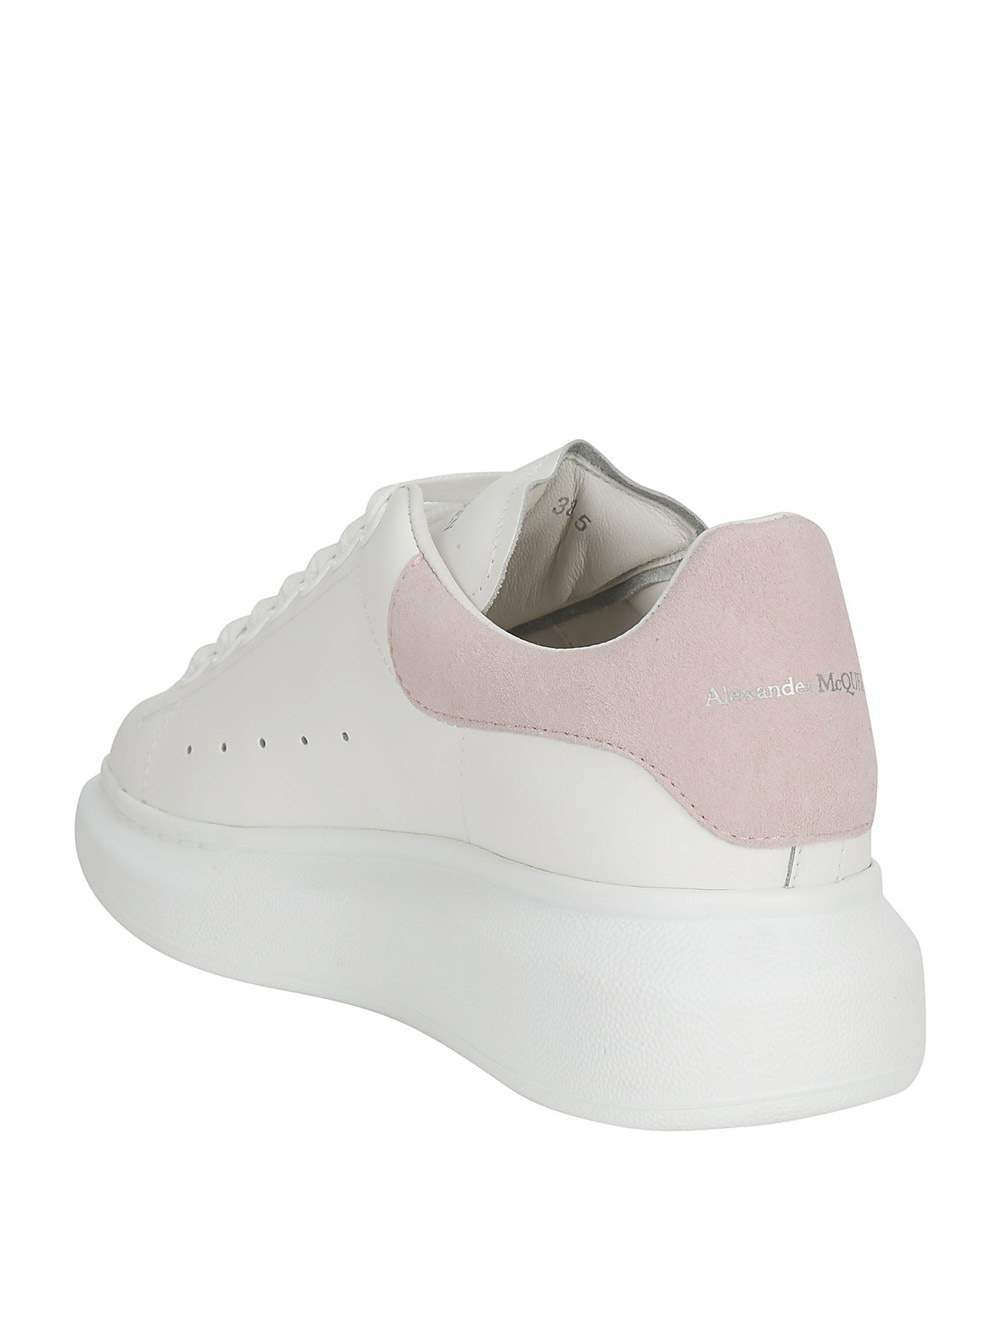 Alexander Mcqueen Sneakers In White/patch